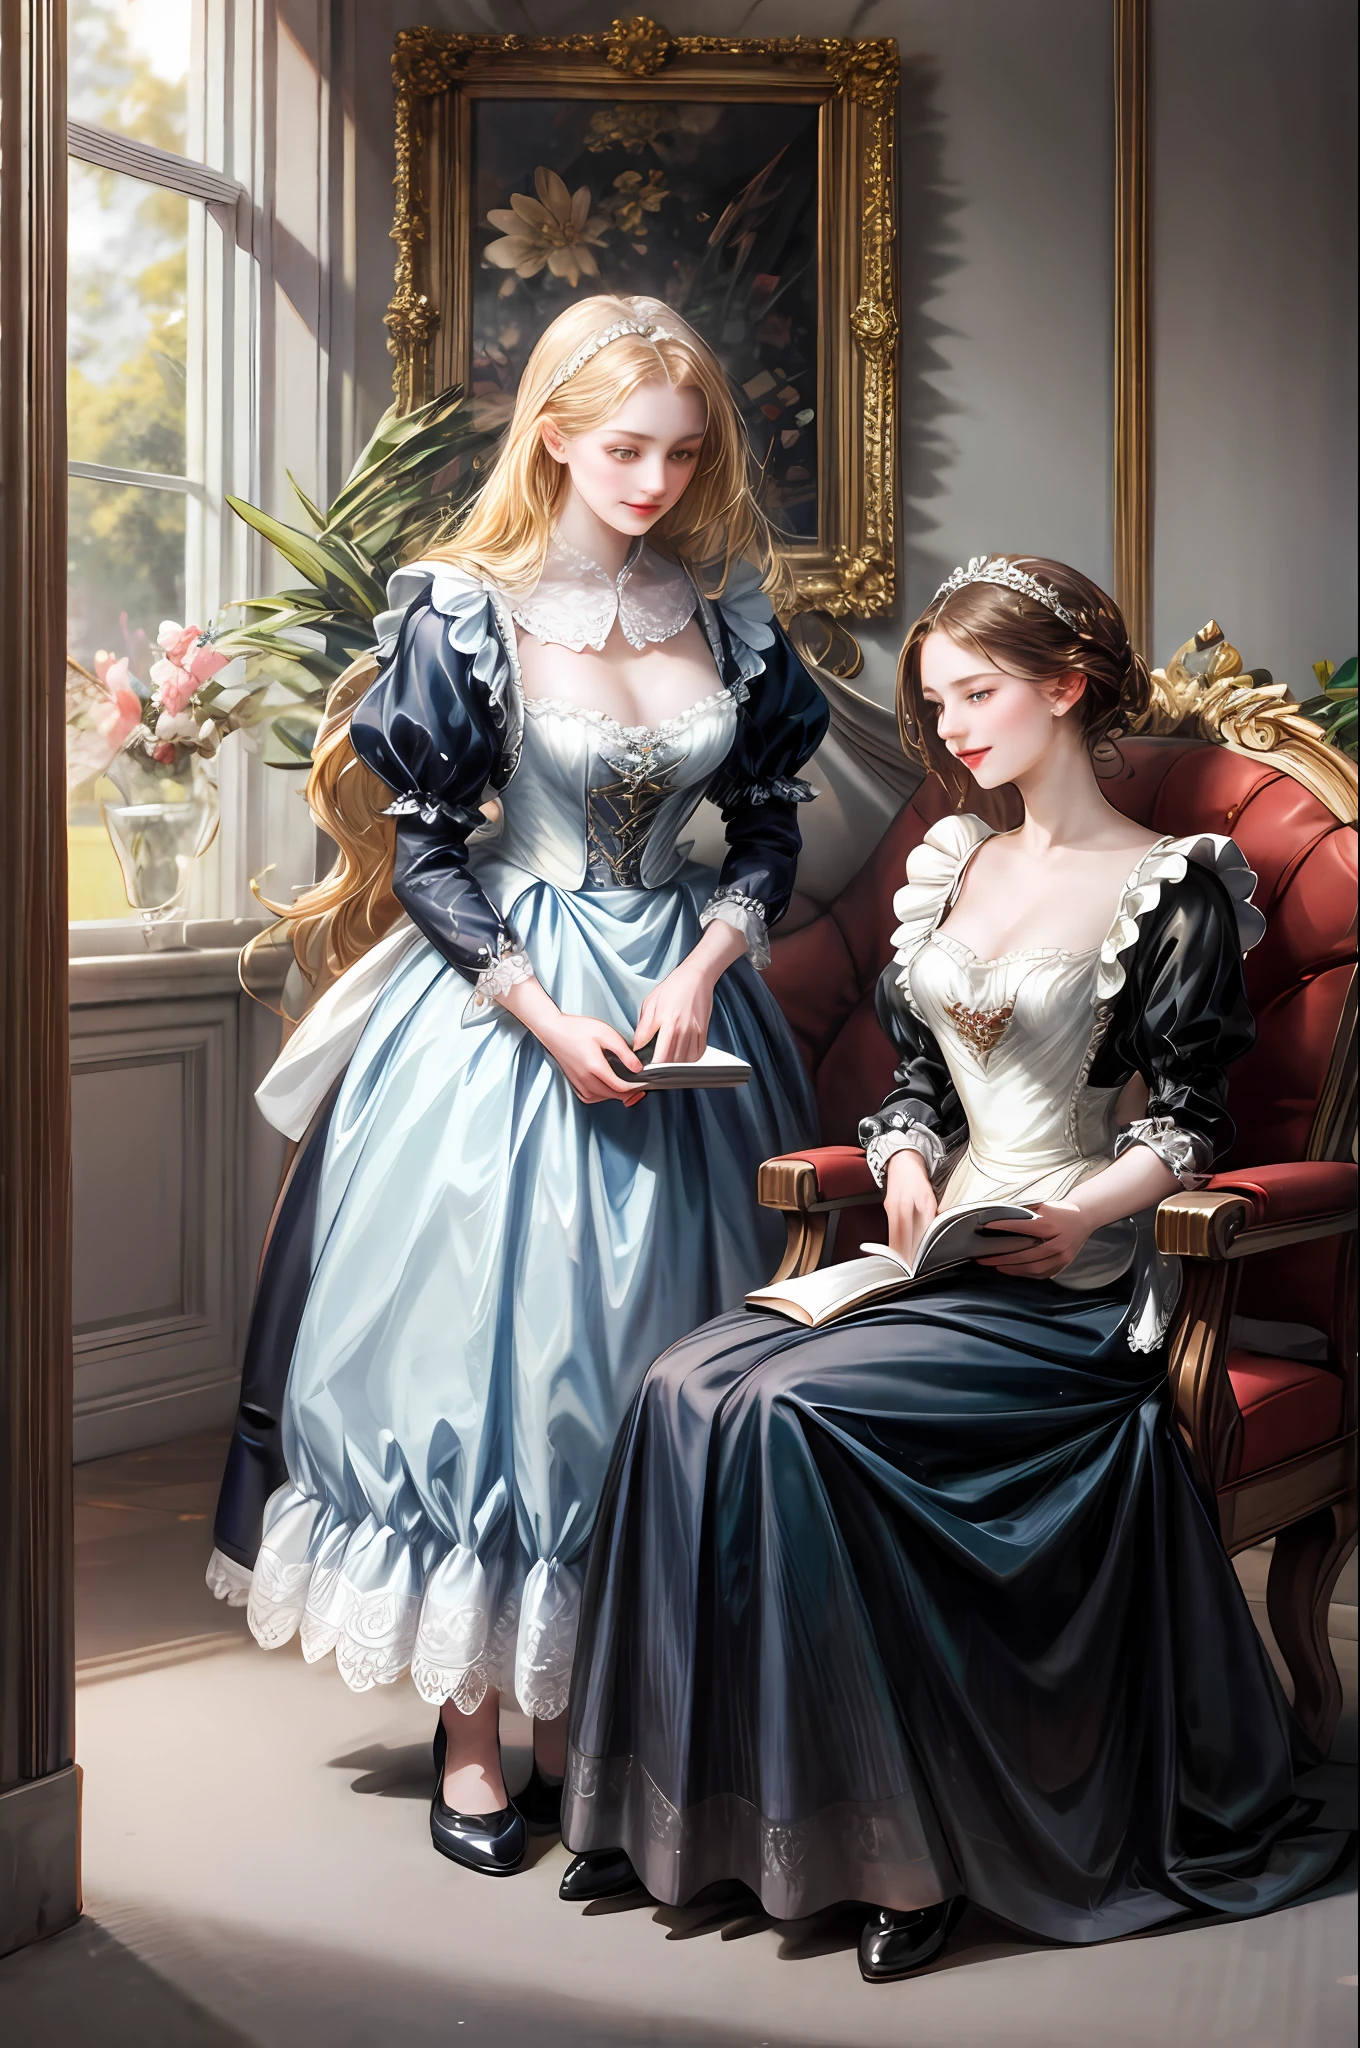 A maid standing next to the noble lady hiding a book behind her and the young lady of nobility sitting